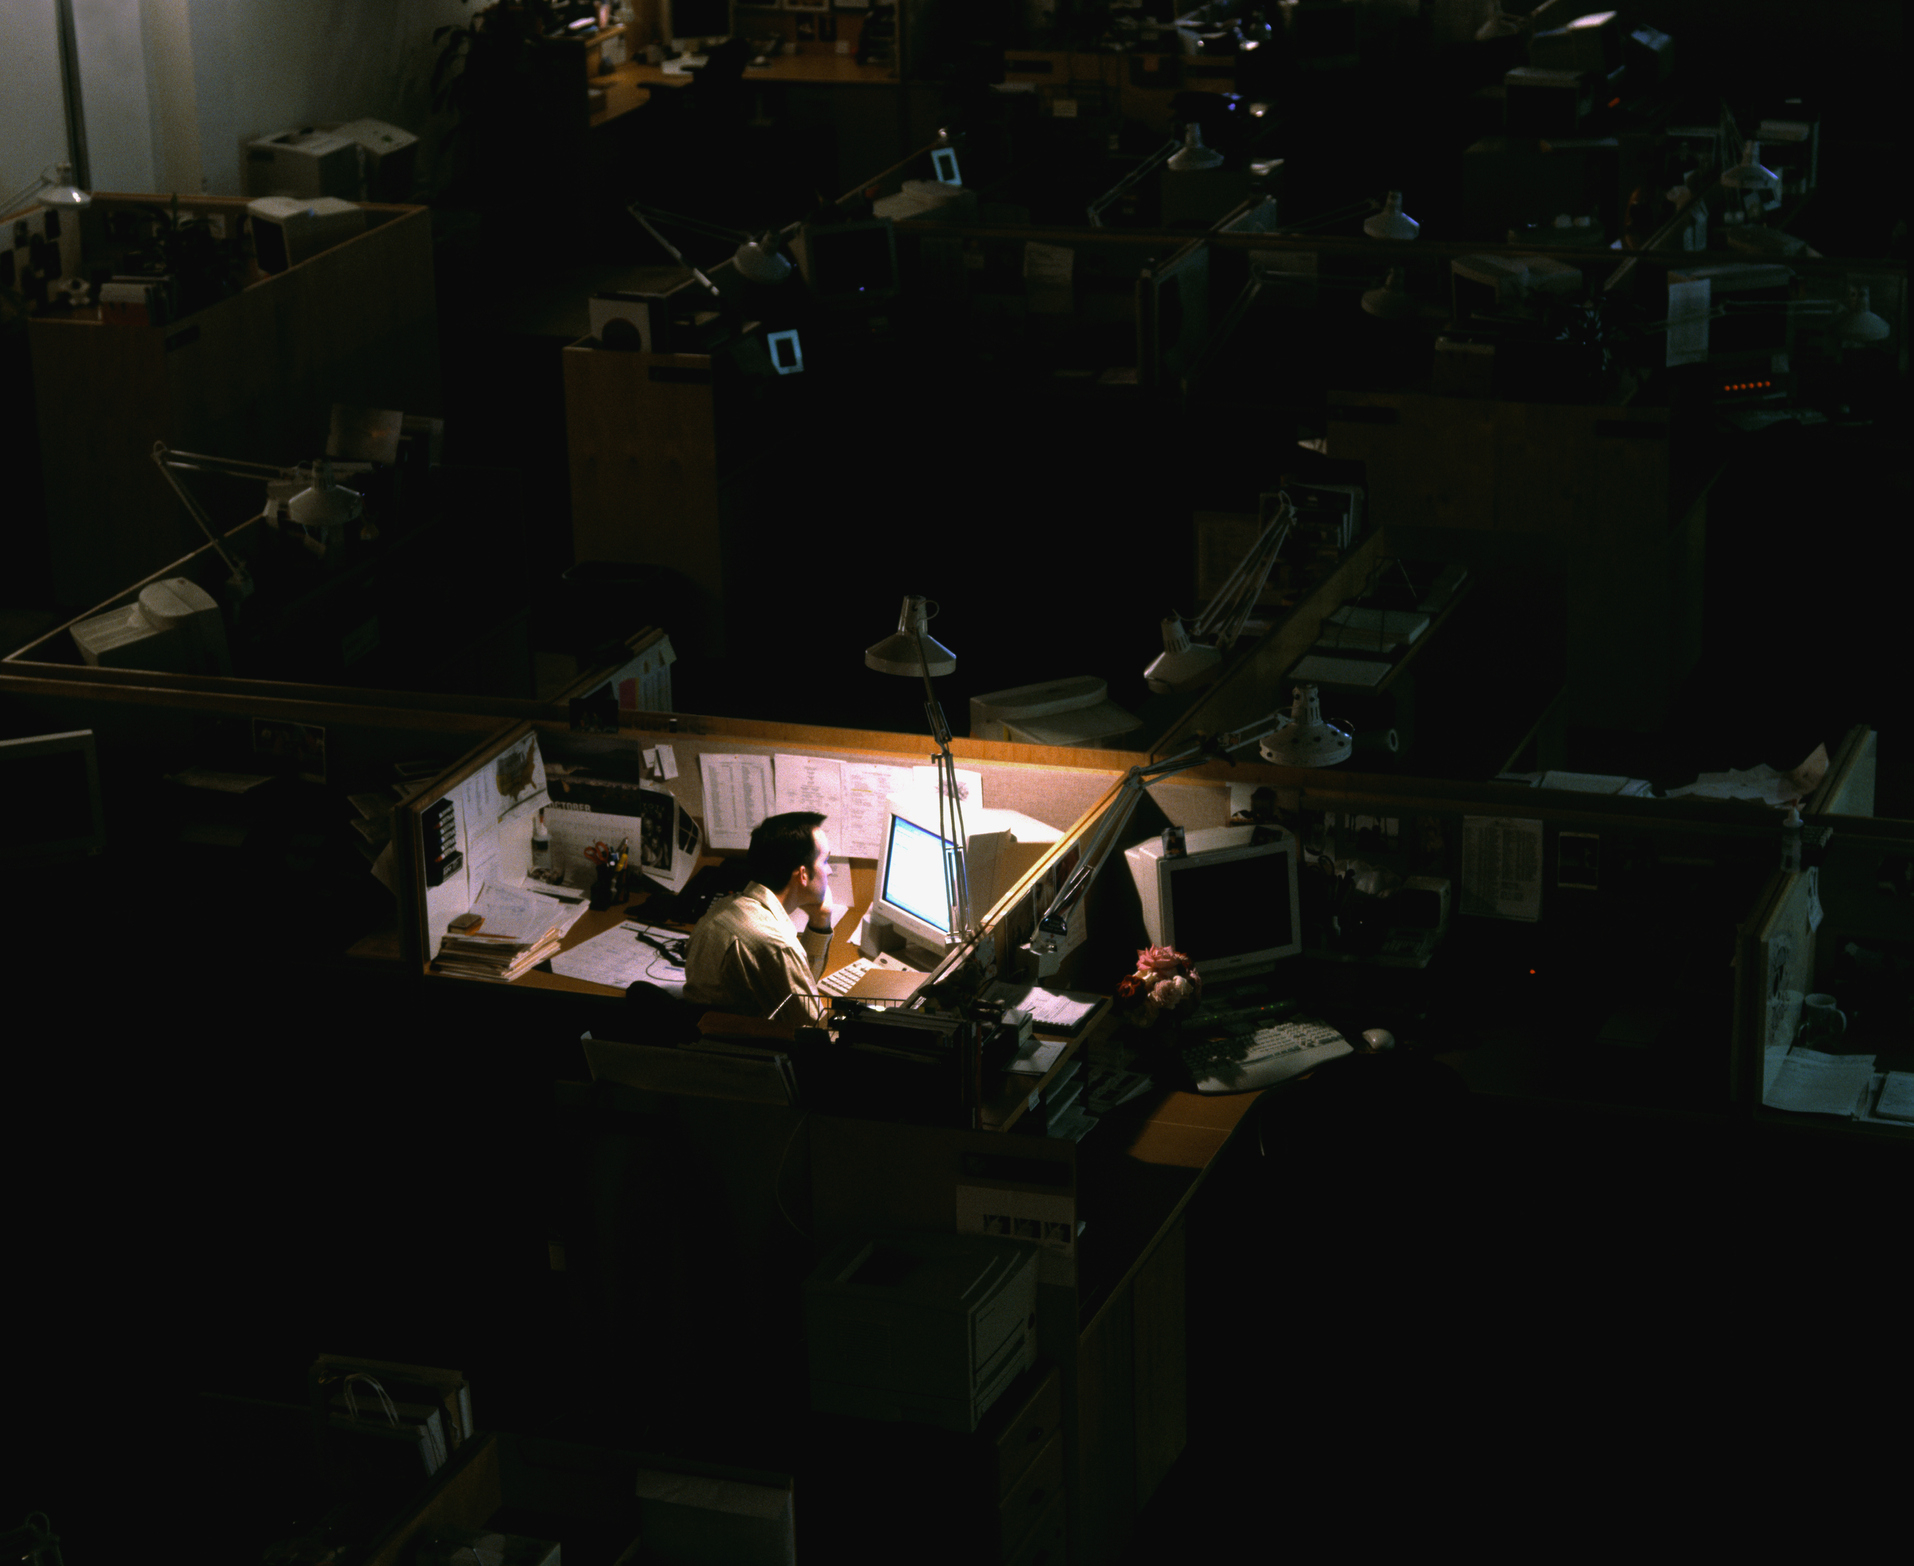 Person working late in an office with dim lighting, surrounded by desks and computers